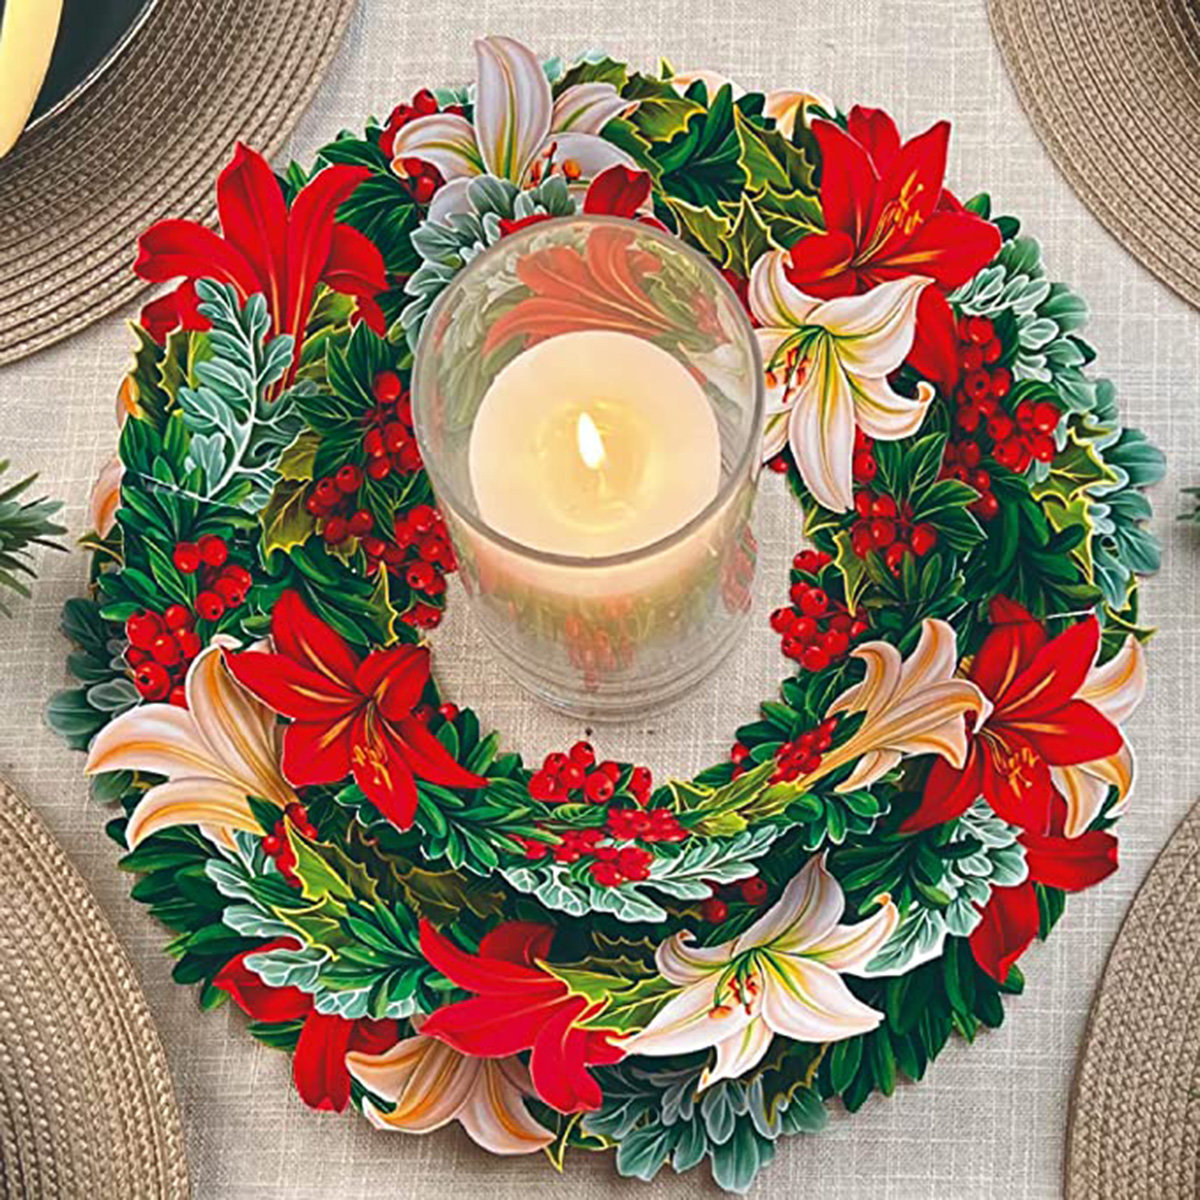 22 Of The Best Holiday Decor Items To Show Your Festive Spirit